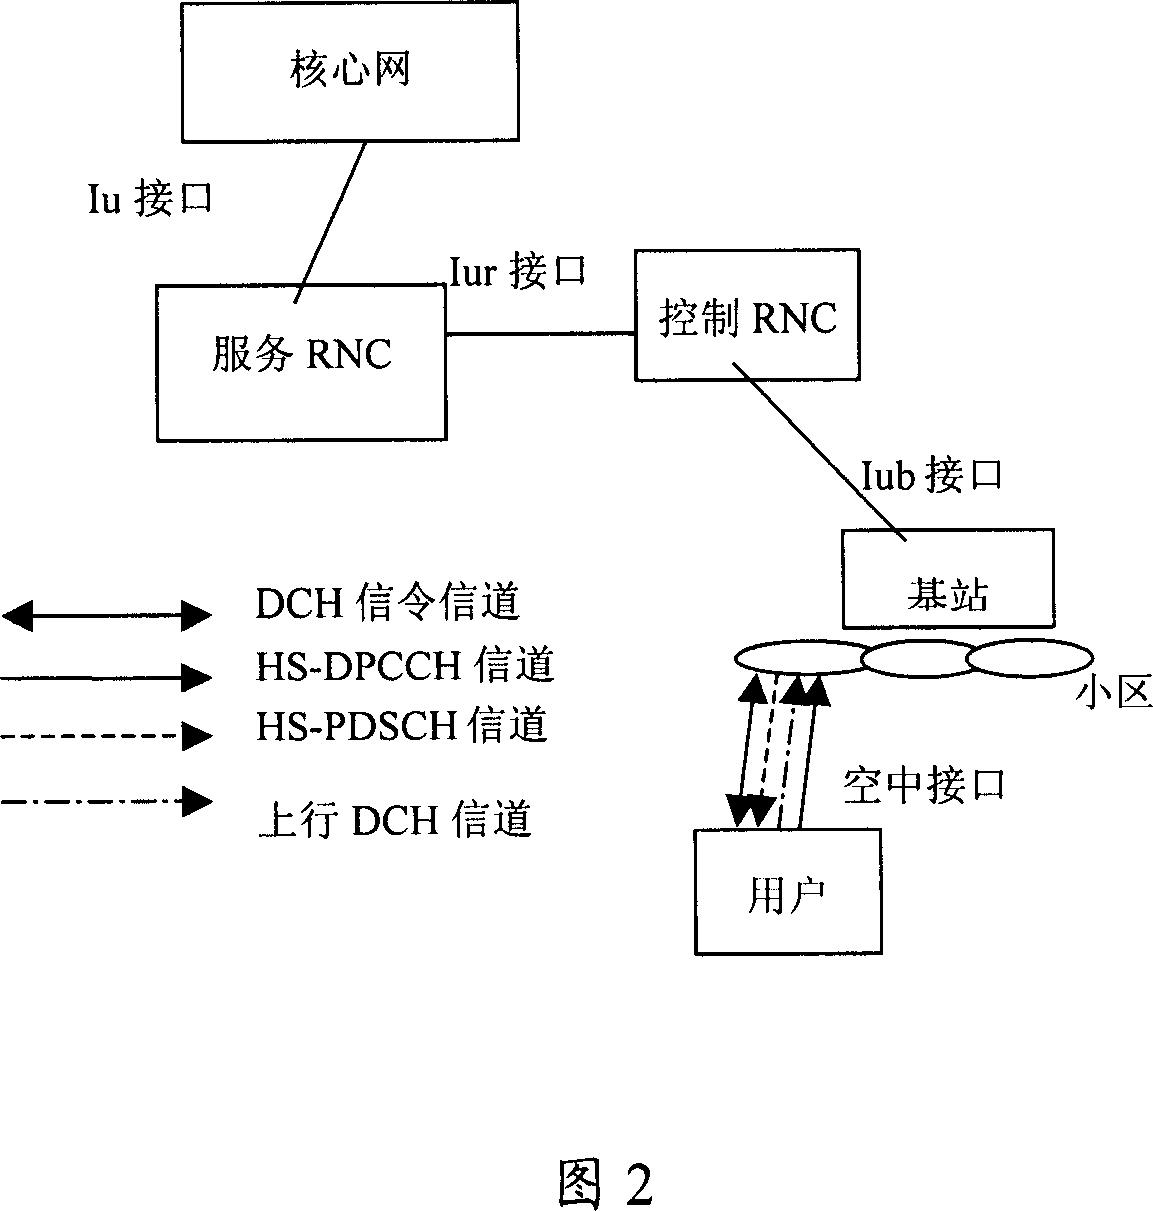 Regulation method of SIR special used for physical control channel DPCCH